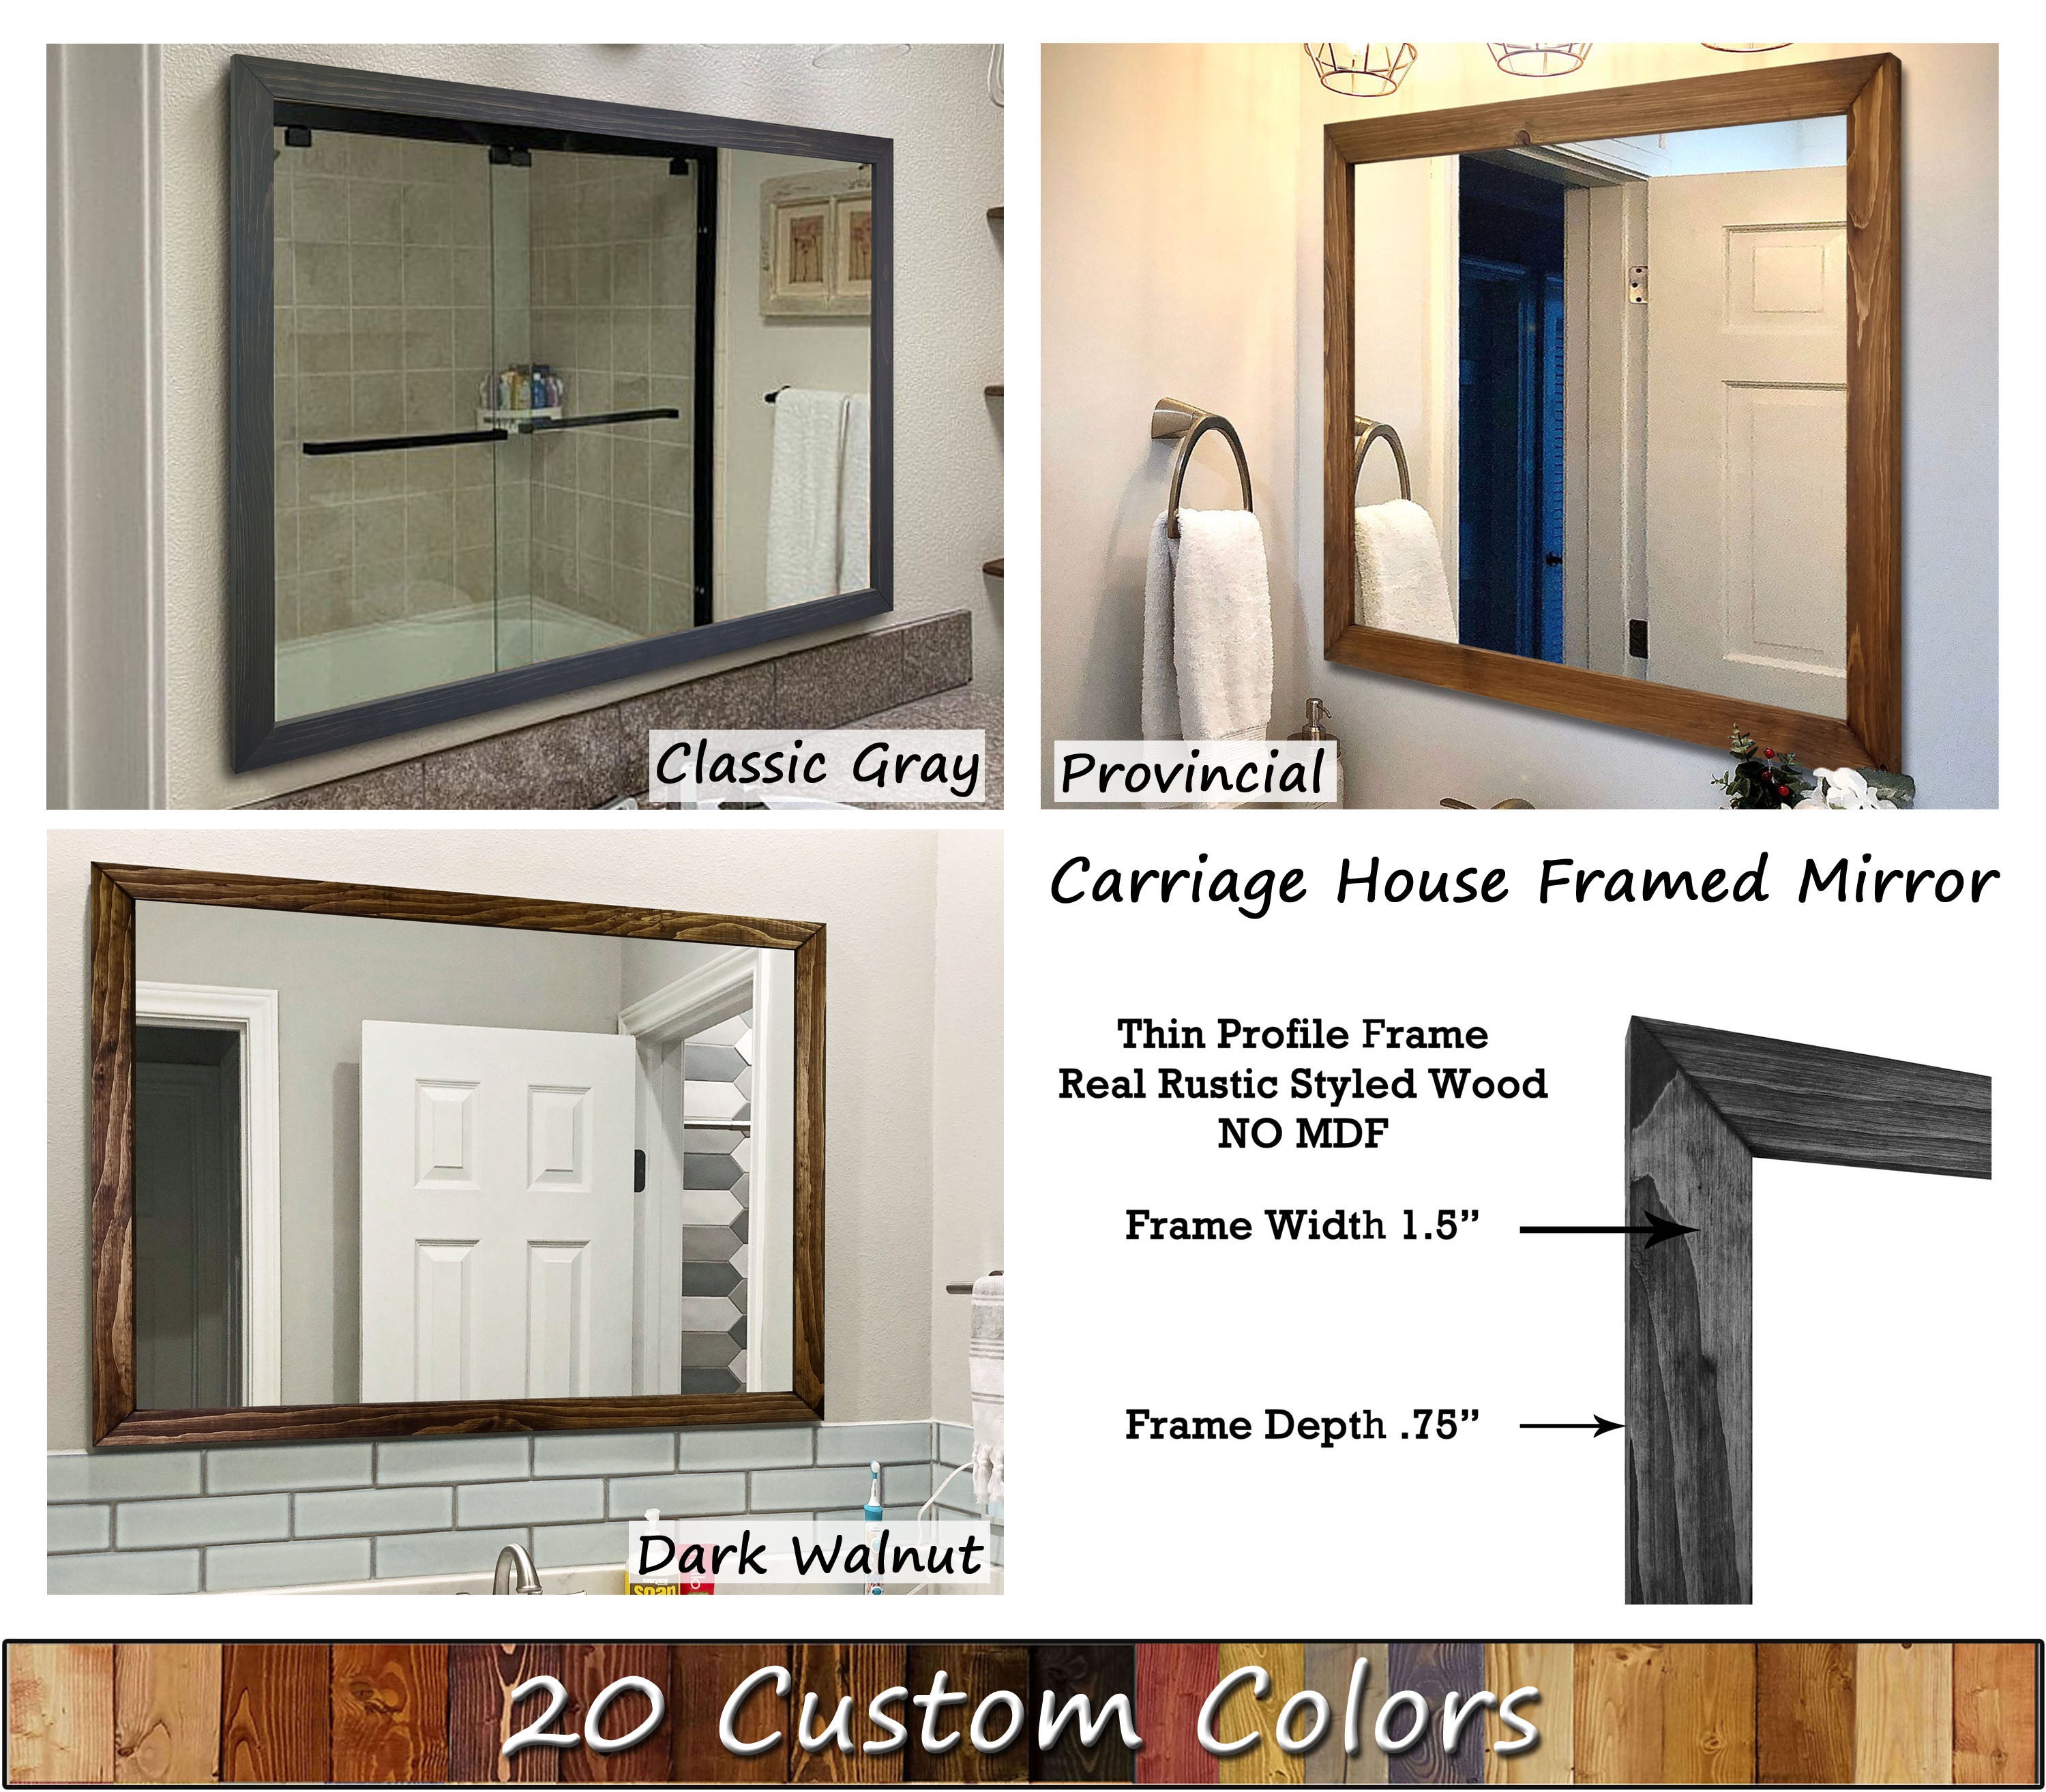 Carriage House Framed Mirror, 6 Sizes & 20 Custom Stain Colors, Lane of Lenore